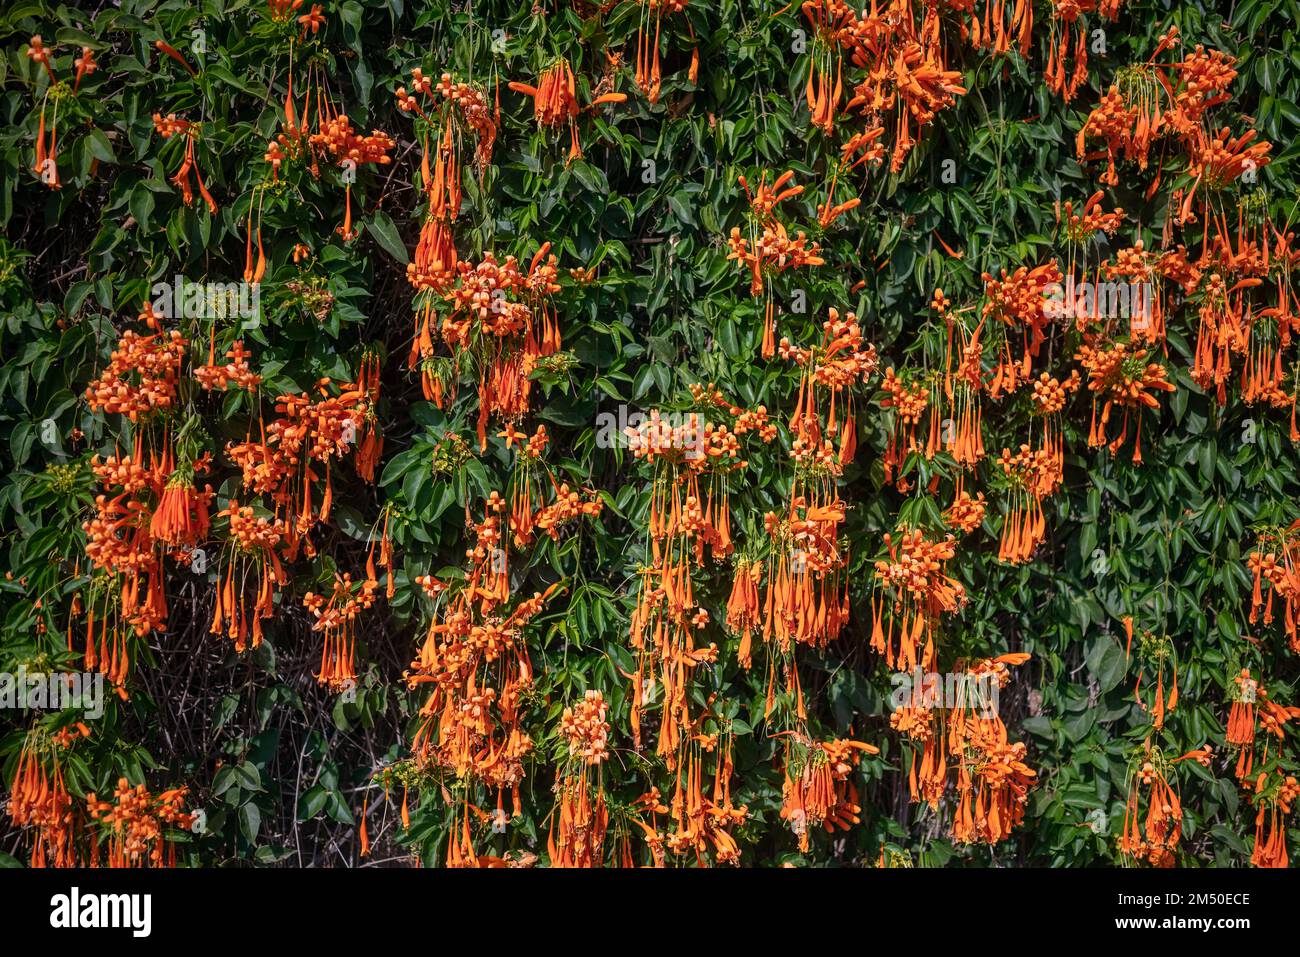 Flamevine orange flowers wall. Green leaves and bright blossoms Stock Photo